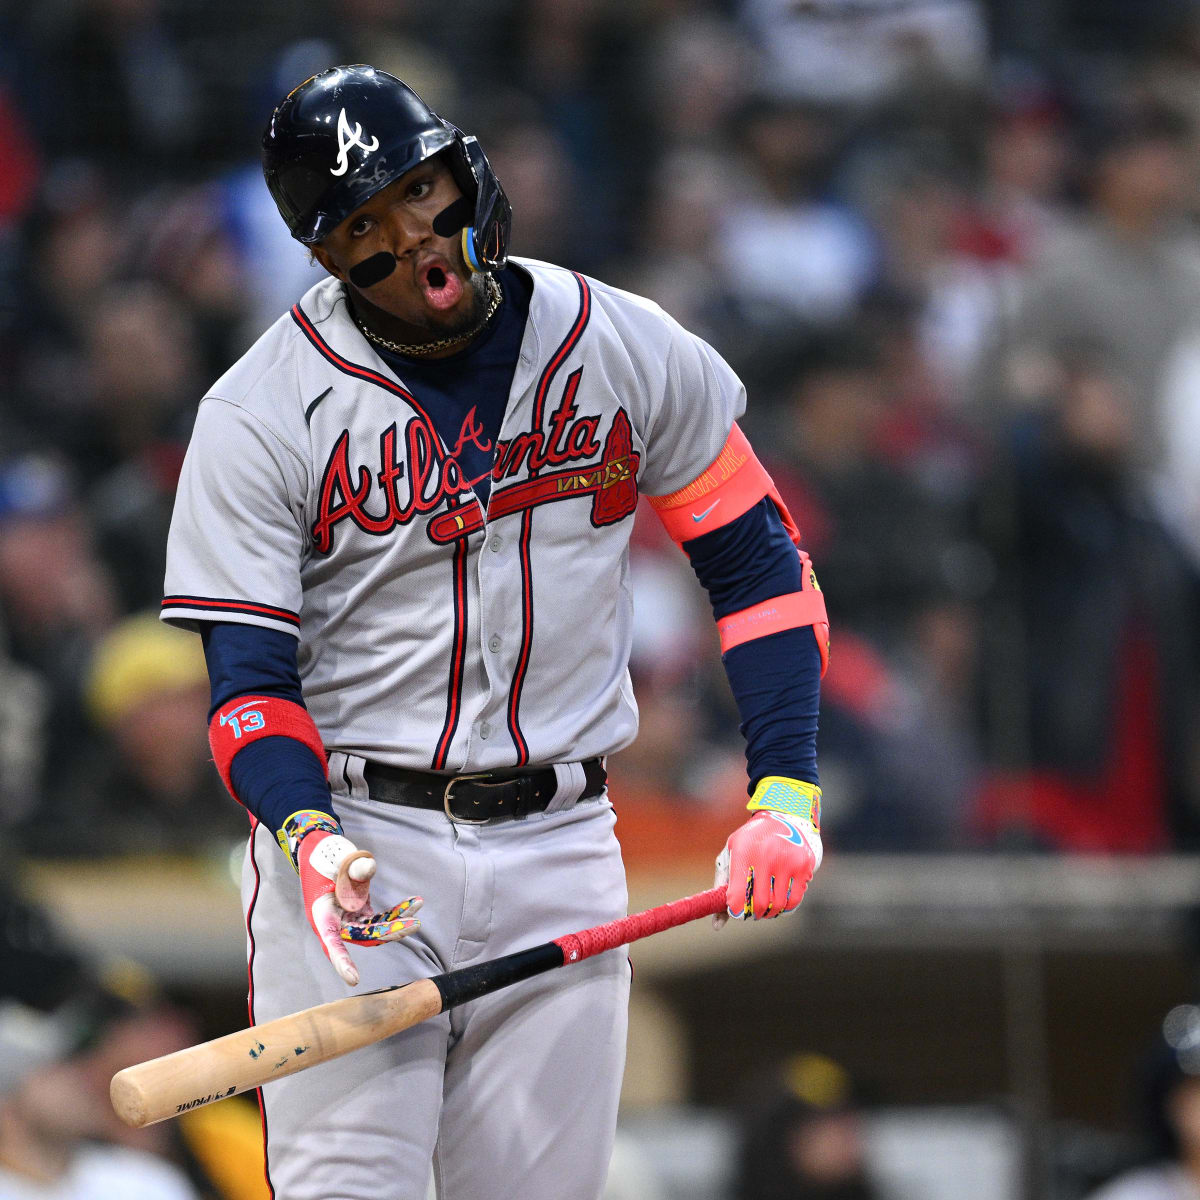 Ronald Acuna Jr. injury update: Braves OF exits game after being